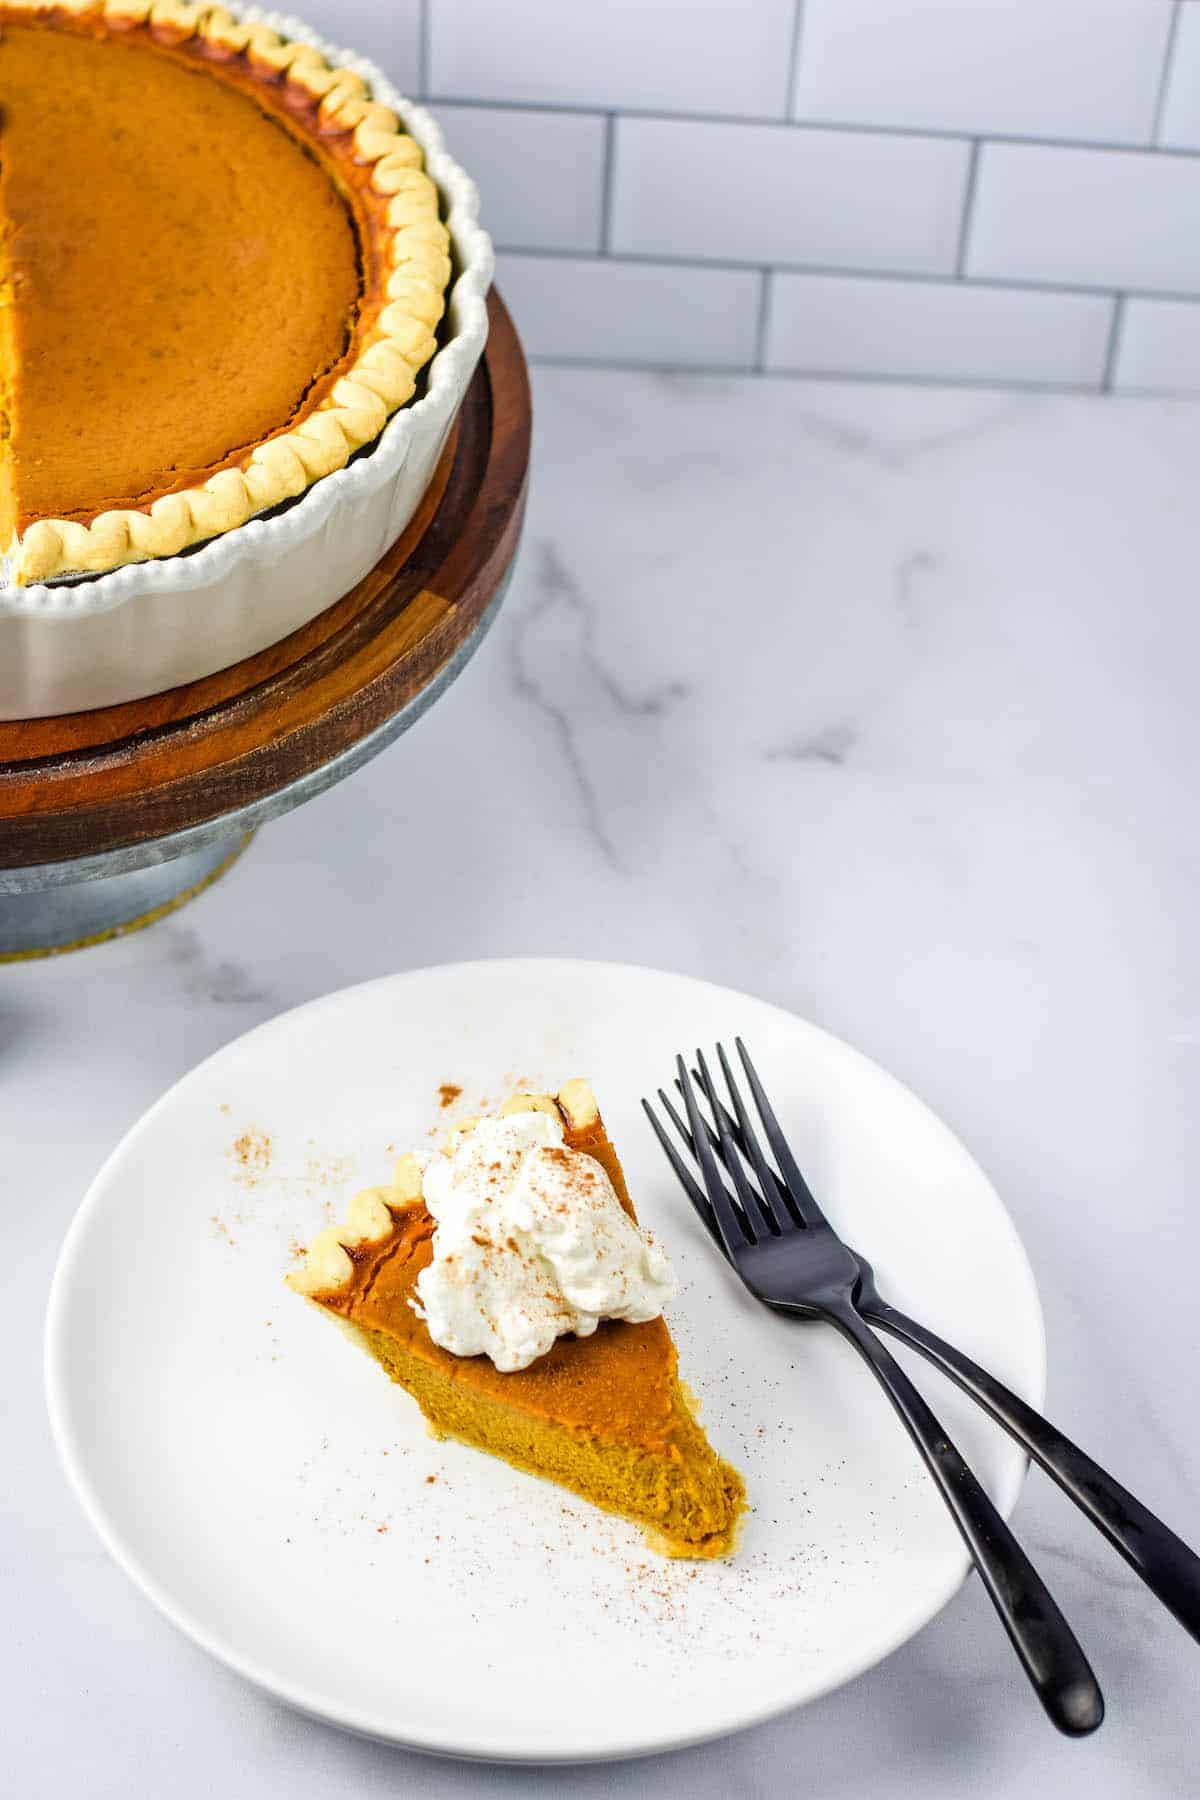 slice on healthy pumpkin pie on white plate with black forks